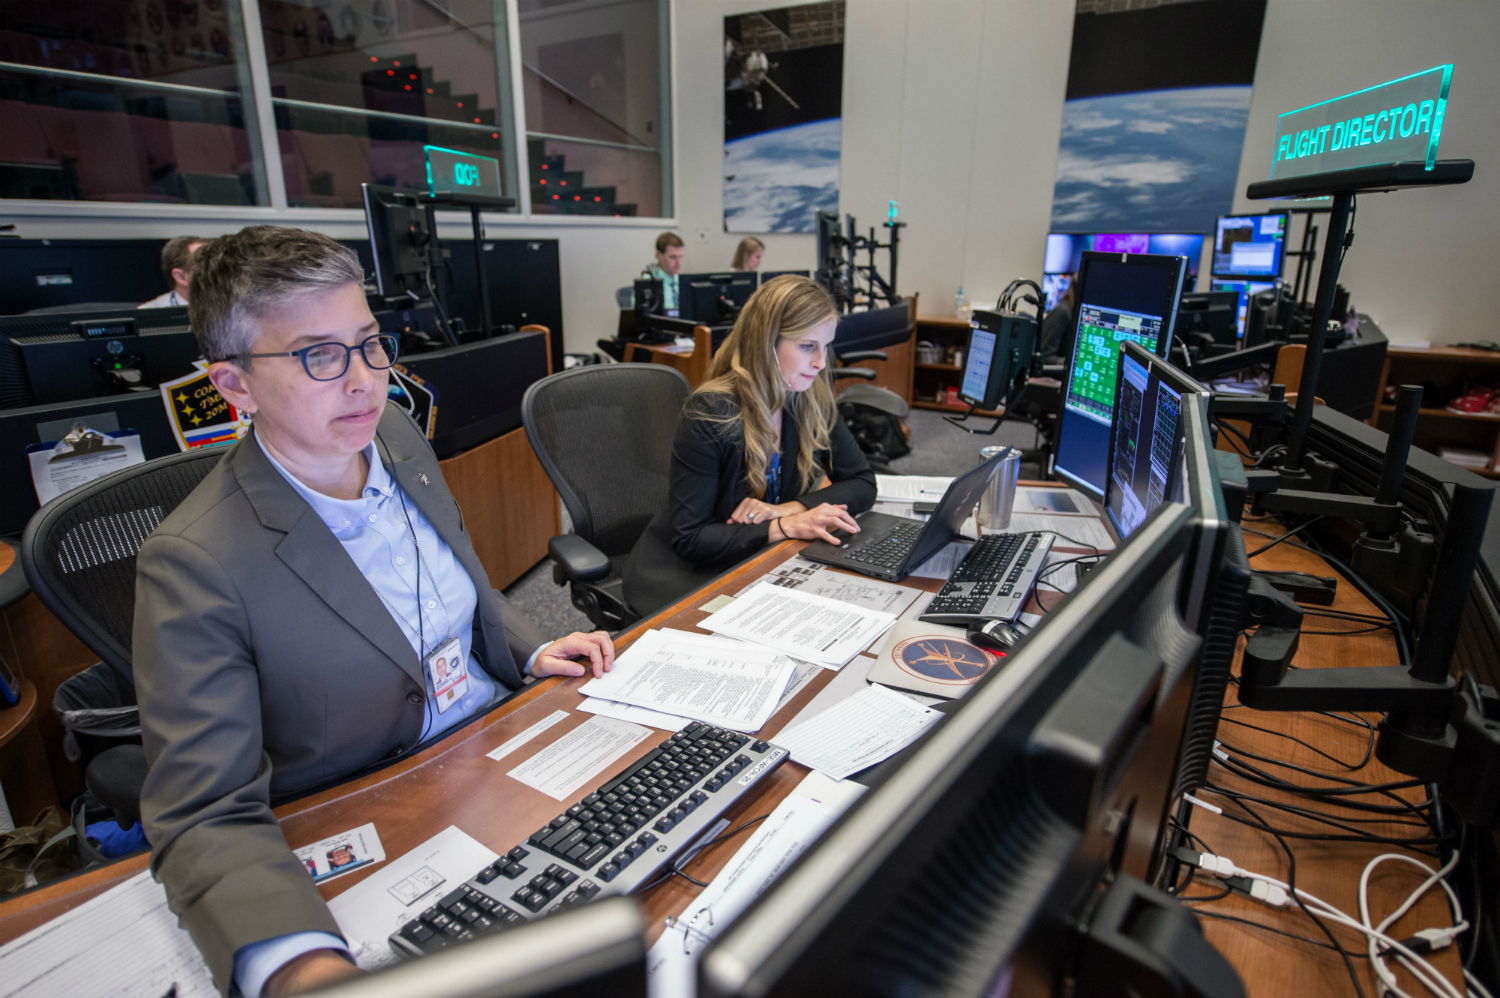 Flight directors work in Mission Control at NASA’s Johnson Space Center in Houston.